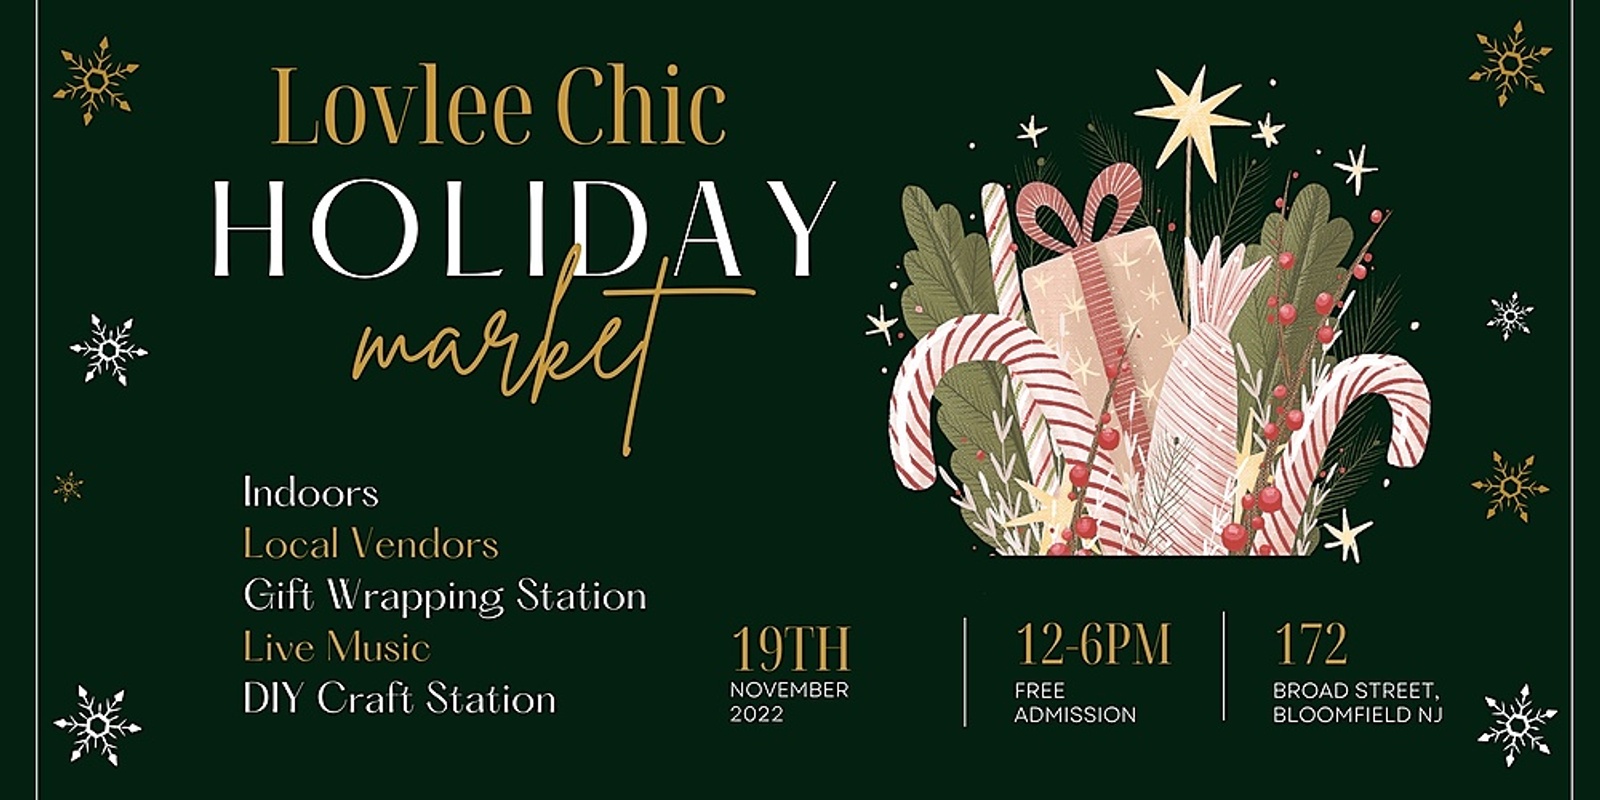 Banner image for Lovlee Chic Holiday Market